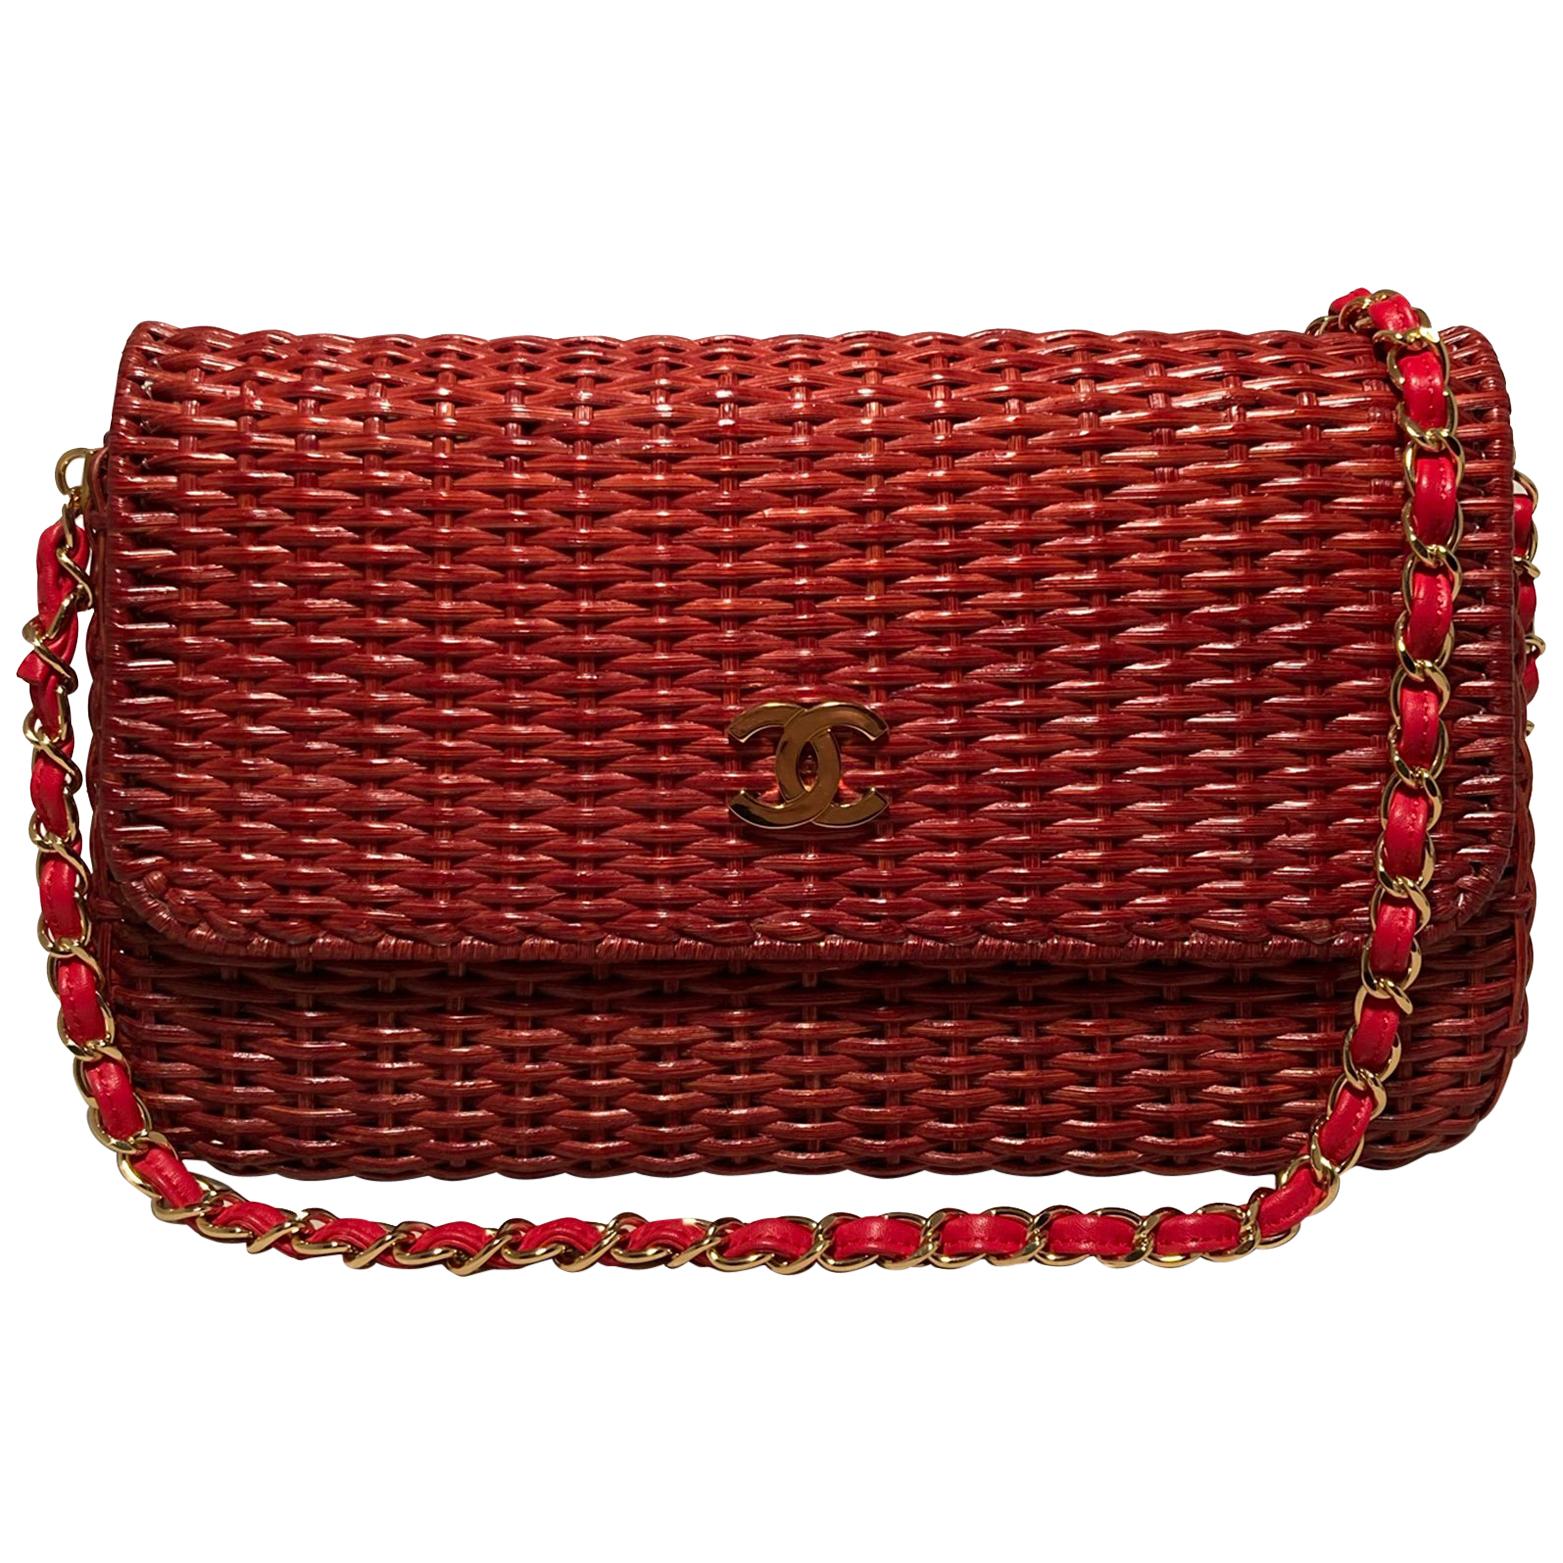 Chanel Red Wicker Classic Flap Shoulder Bag For Sale